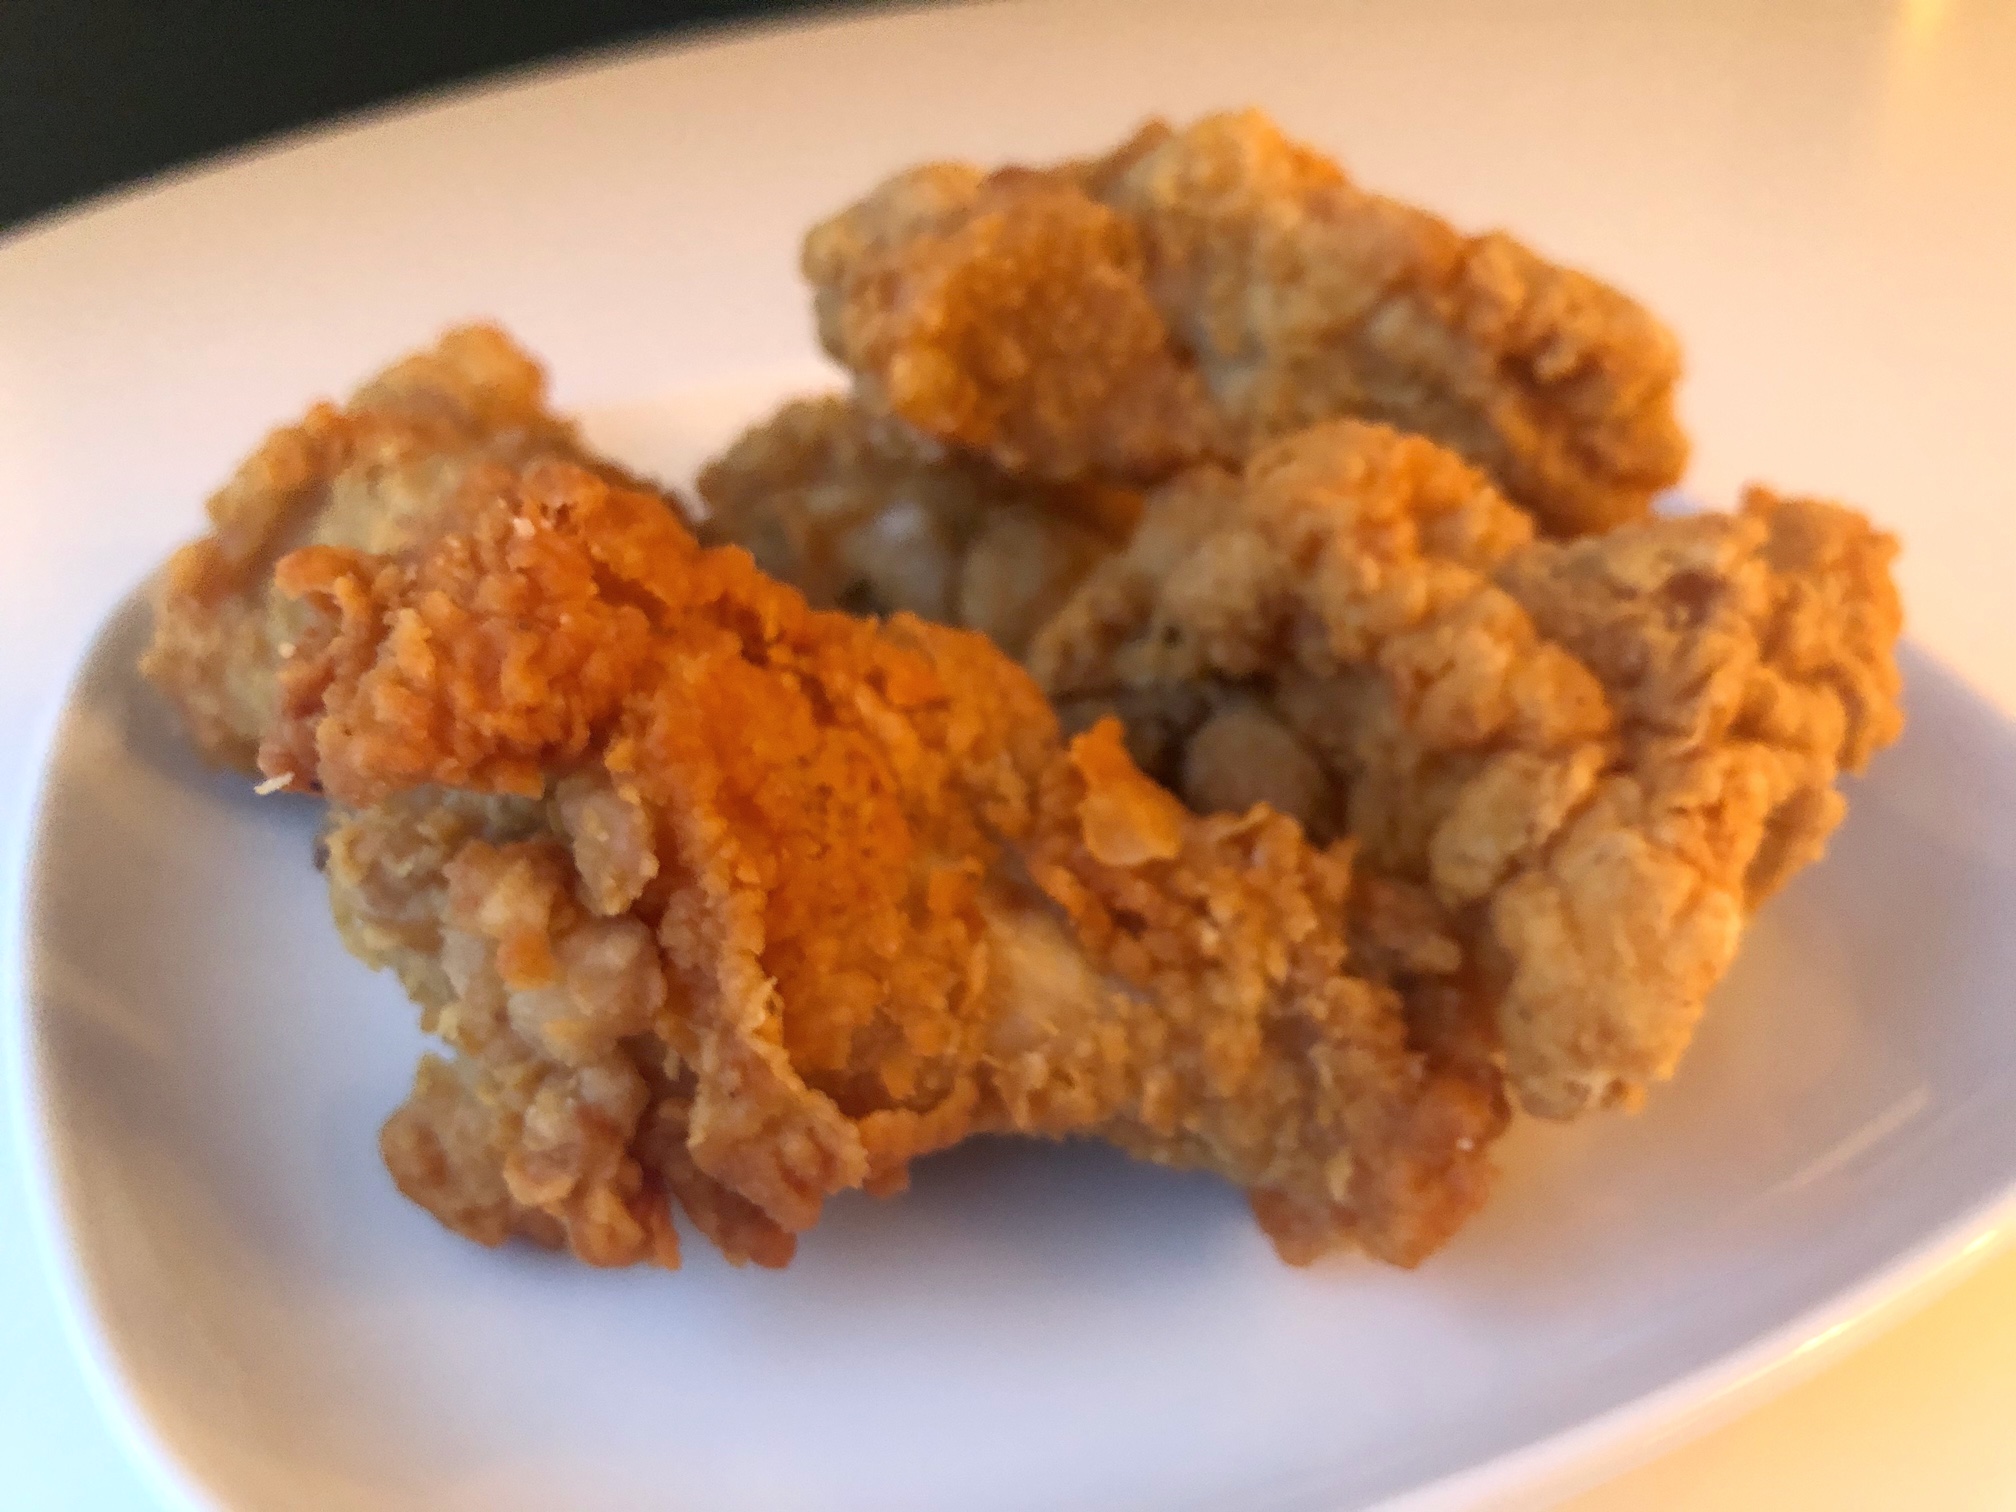 Five small chicken wings, breaded and golden brown, lay on a white plate. Photo by Alyssa Buckley.